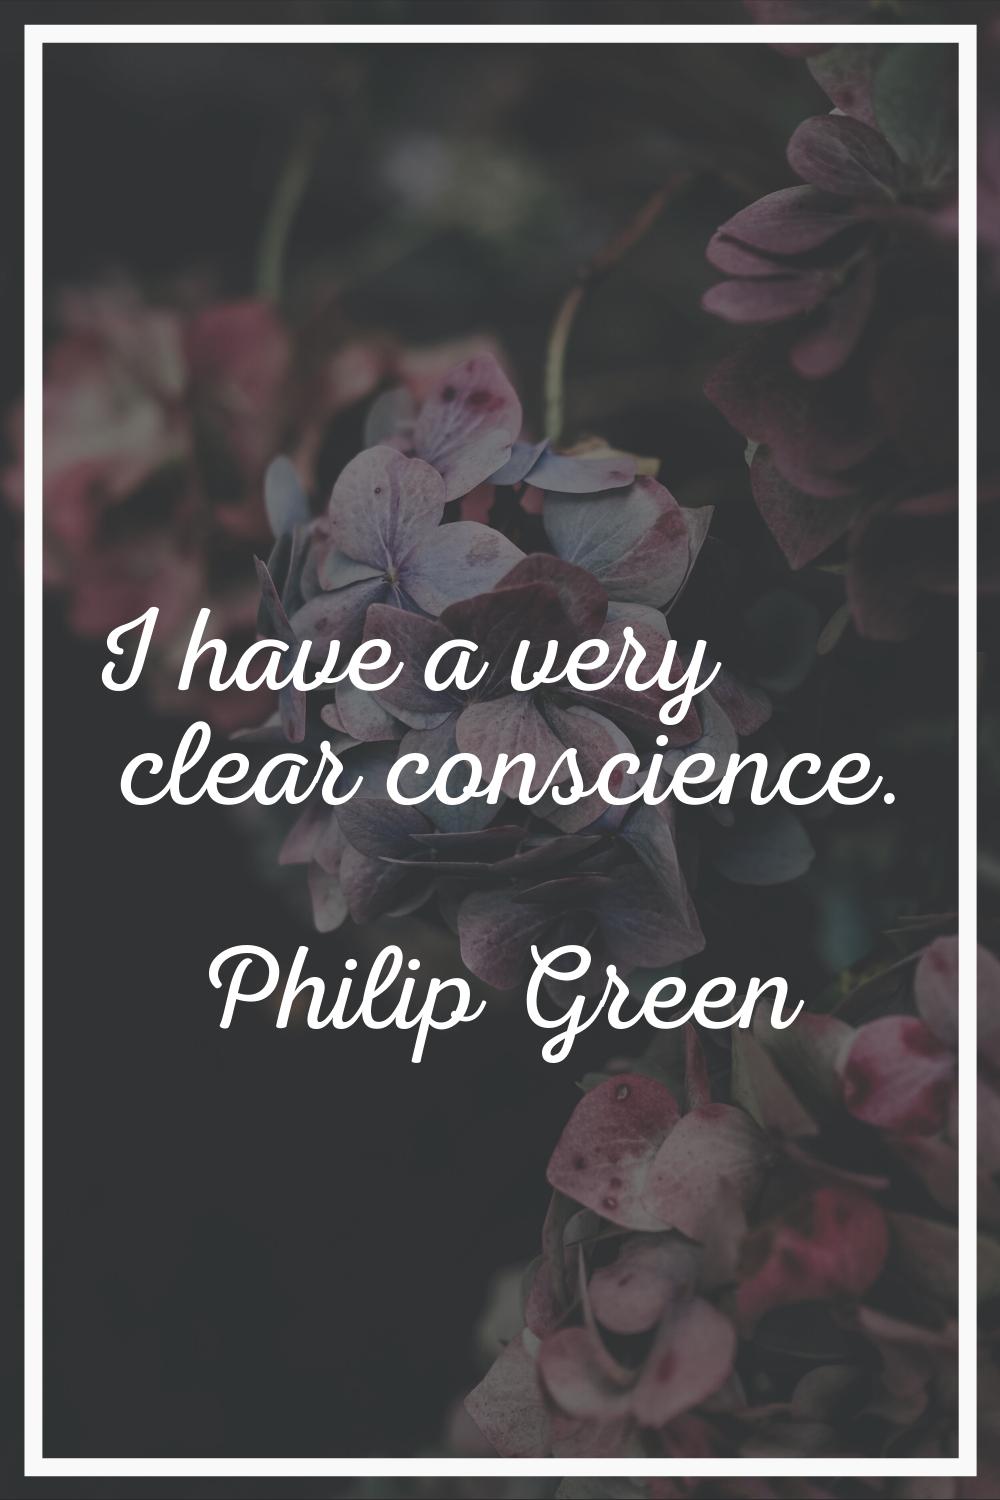 I have a very clear conscience.